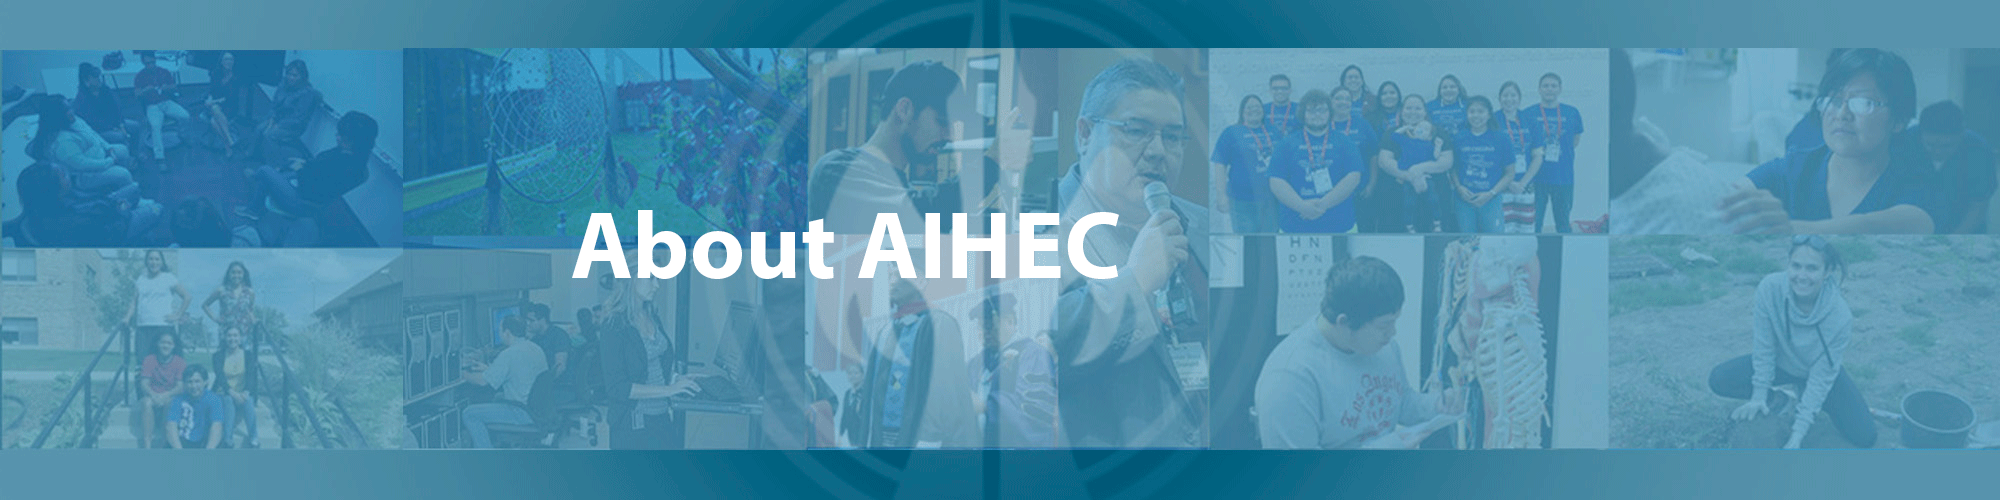 AIHEC_Banner_2c-About-AIHEC.png